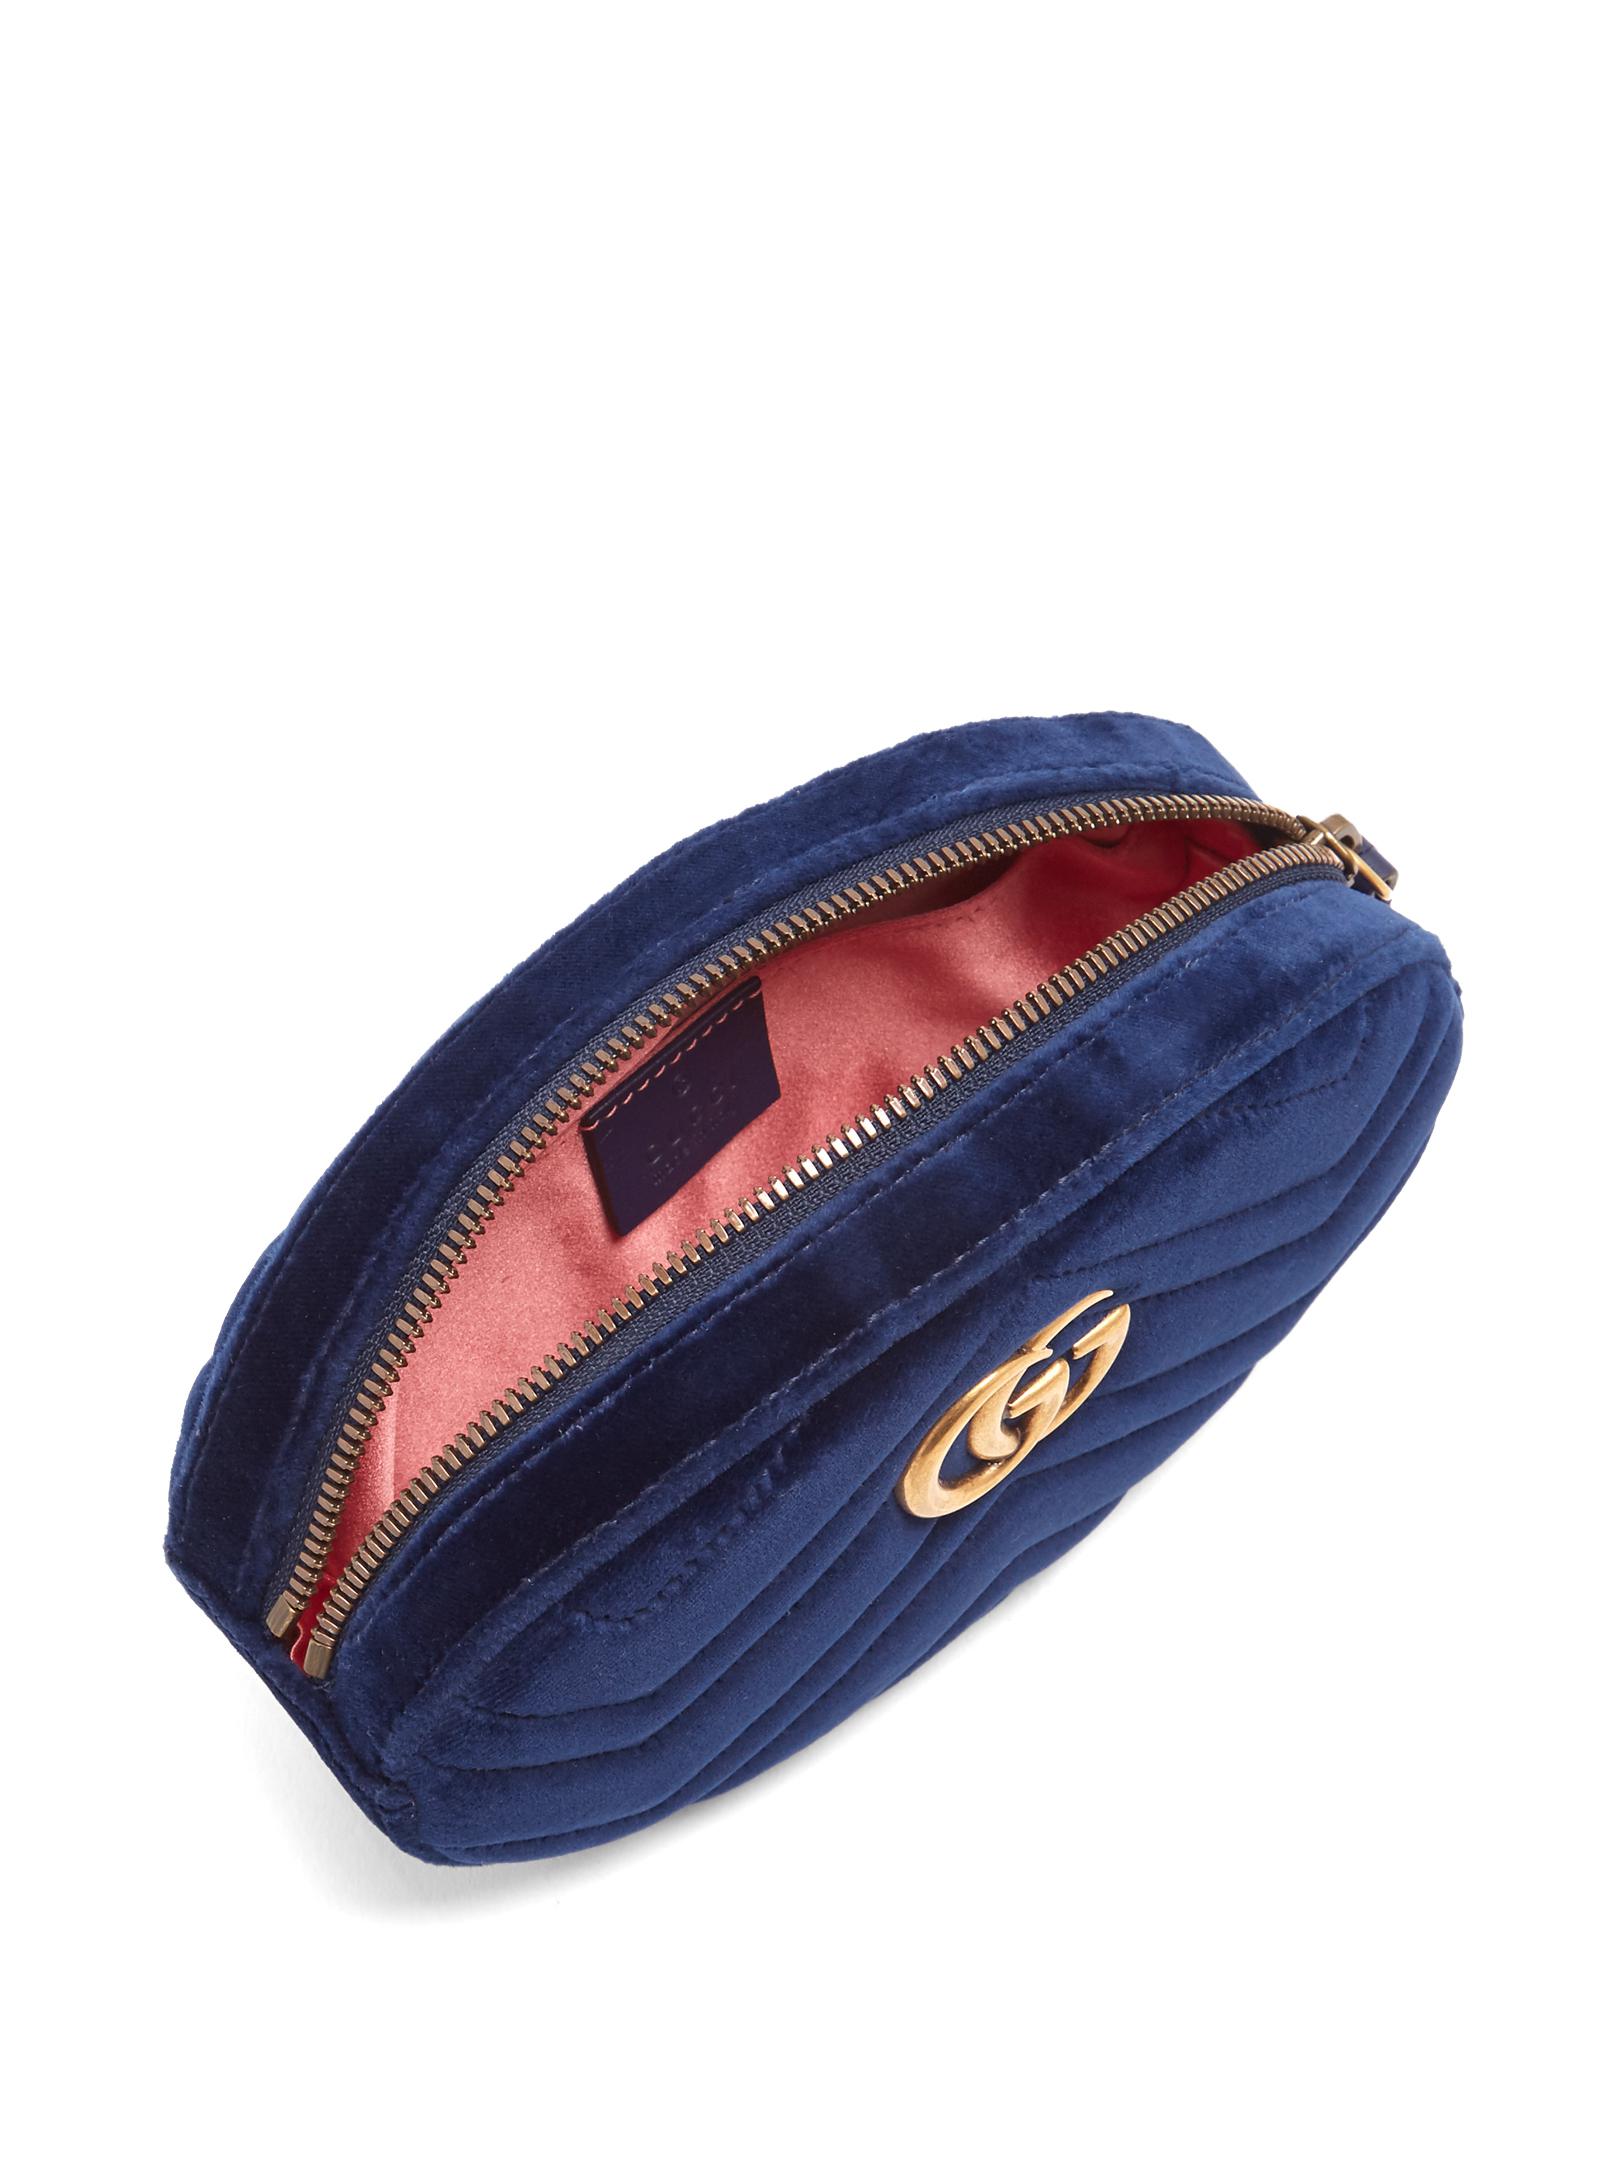 Gucci Gg Marmont Quilted-velvet Belt Bag in Blue - Lyst